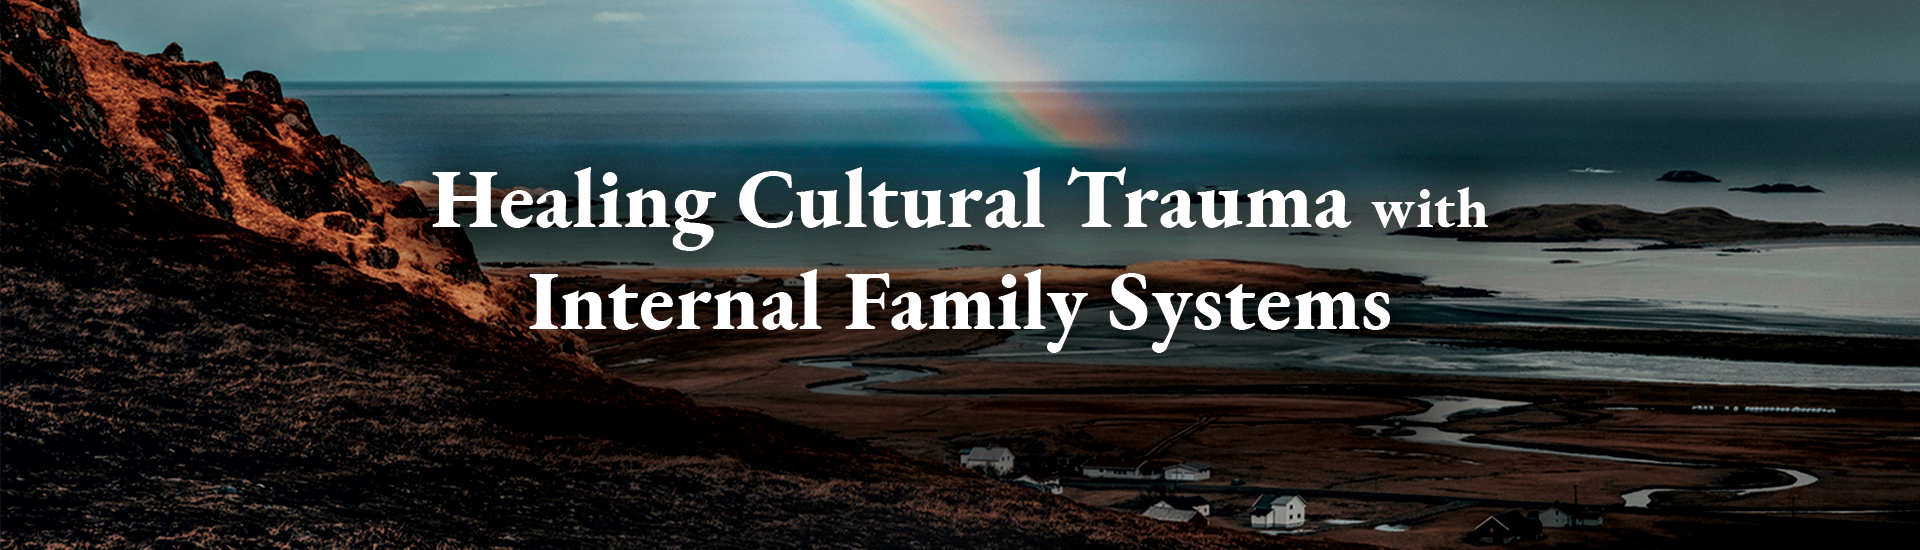 Healing Cultural Trauma with Internal Family Systems (IFS)